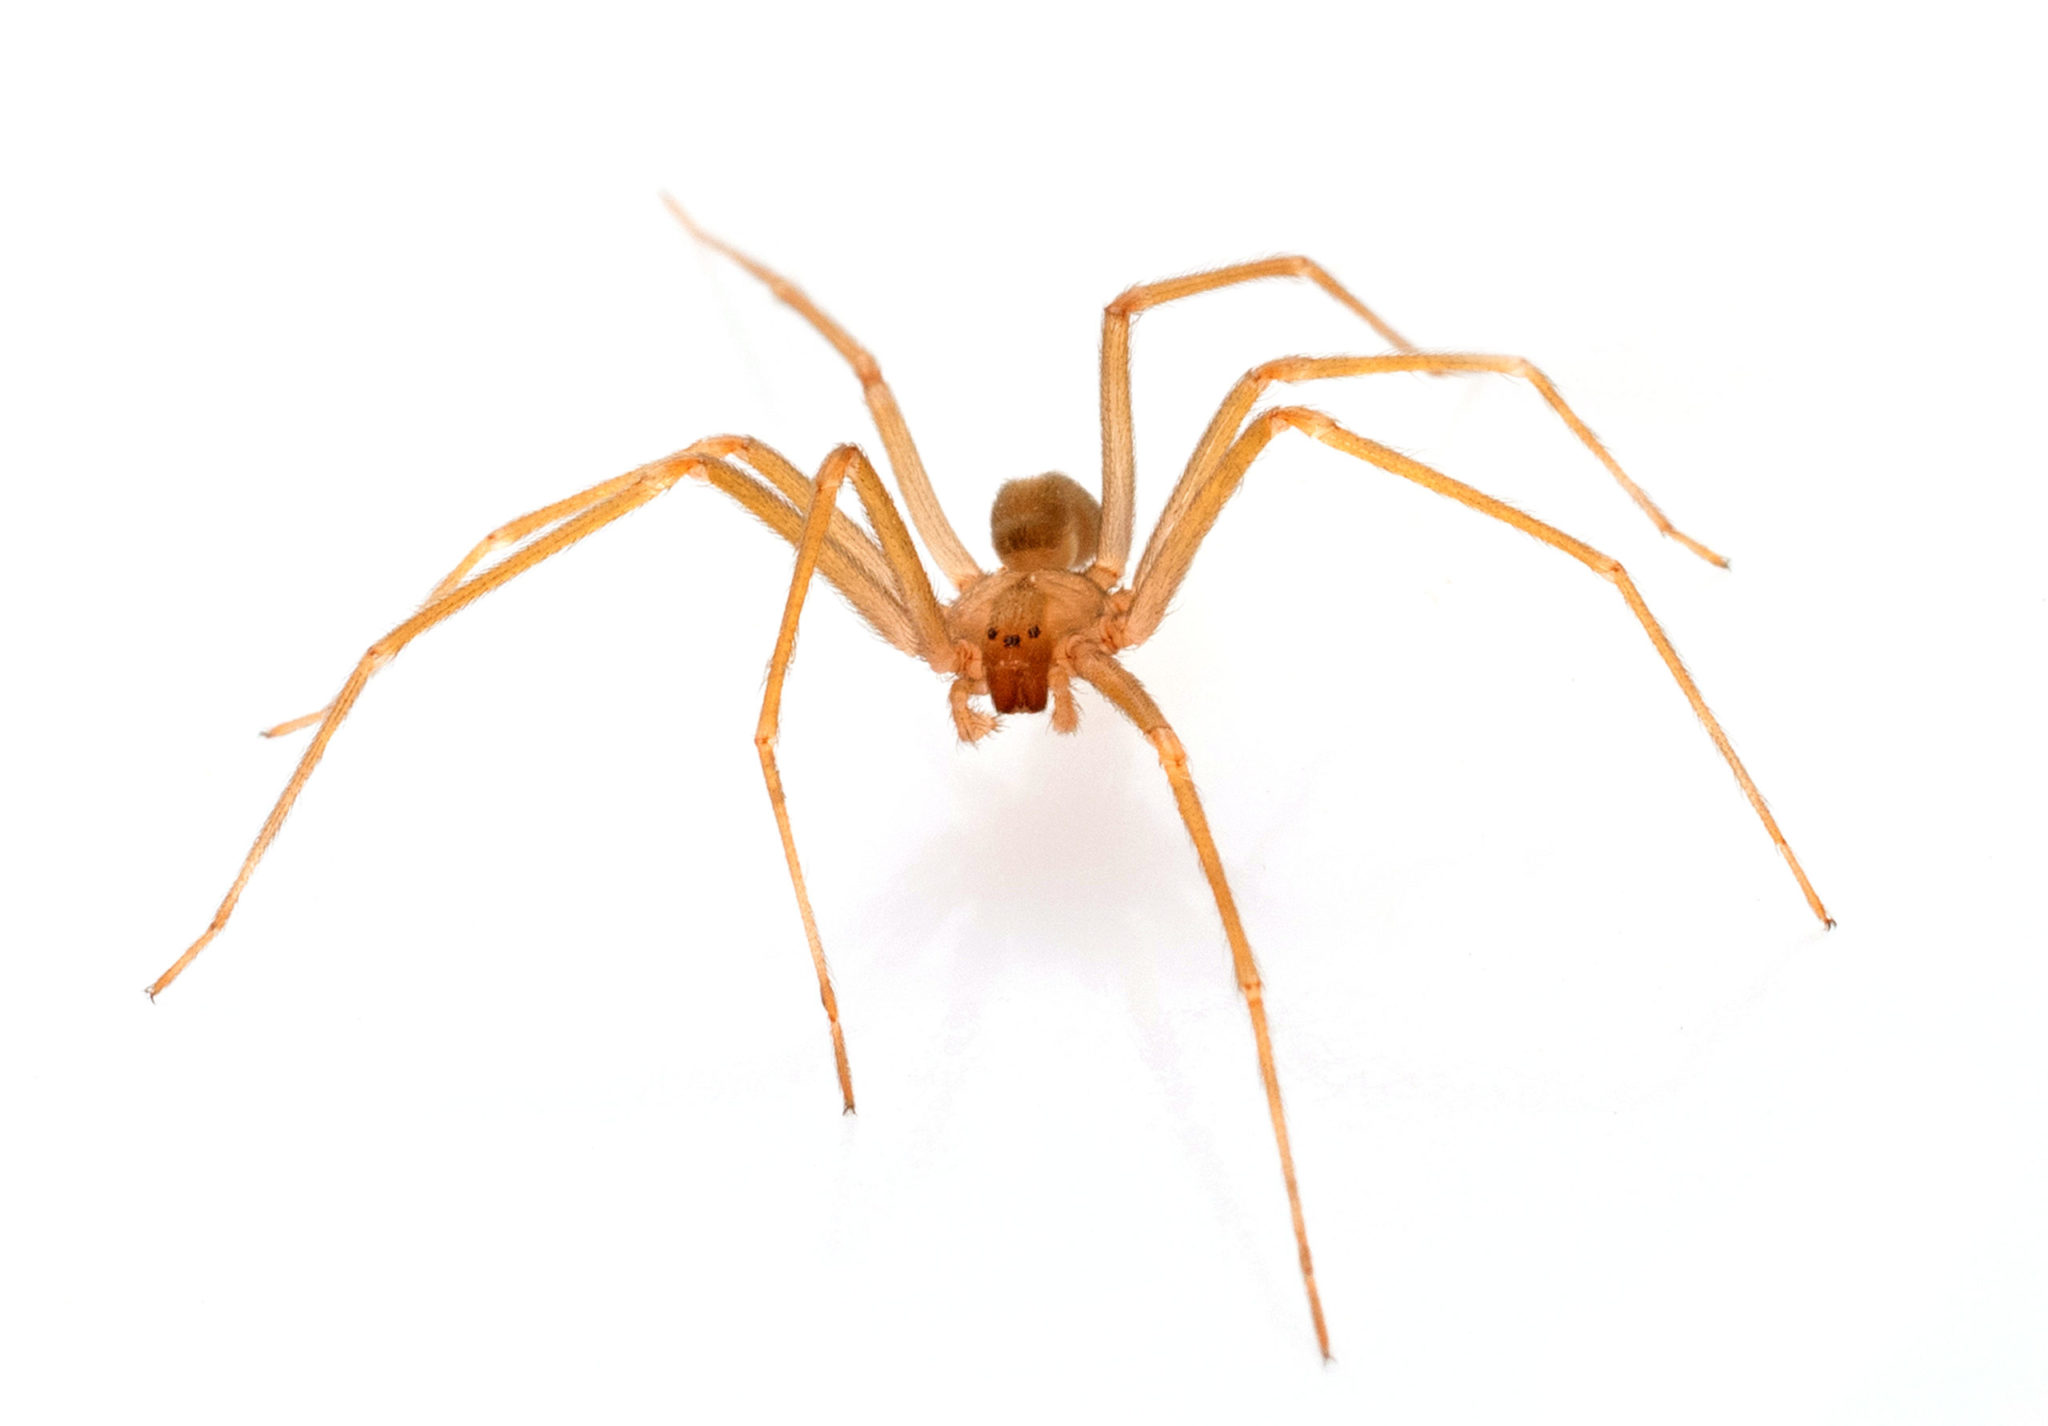 Brown recluse spider in front of white background